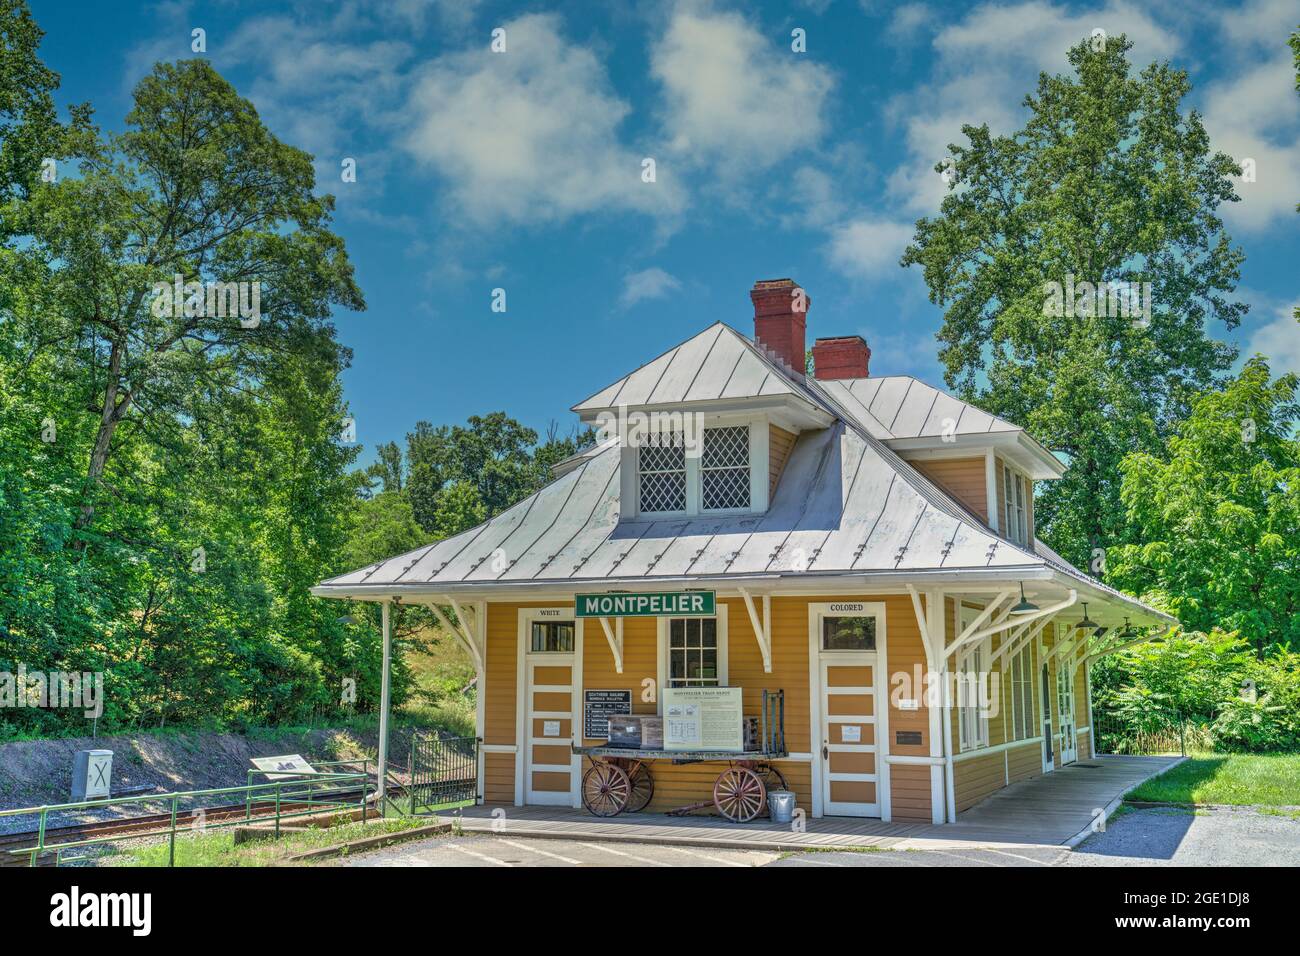 The historic segregated Montpelier Train Station in Virginia. Stock Photo